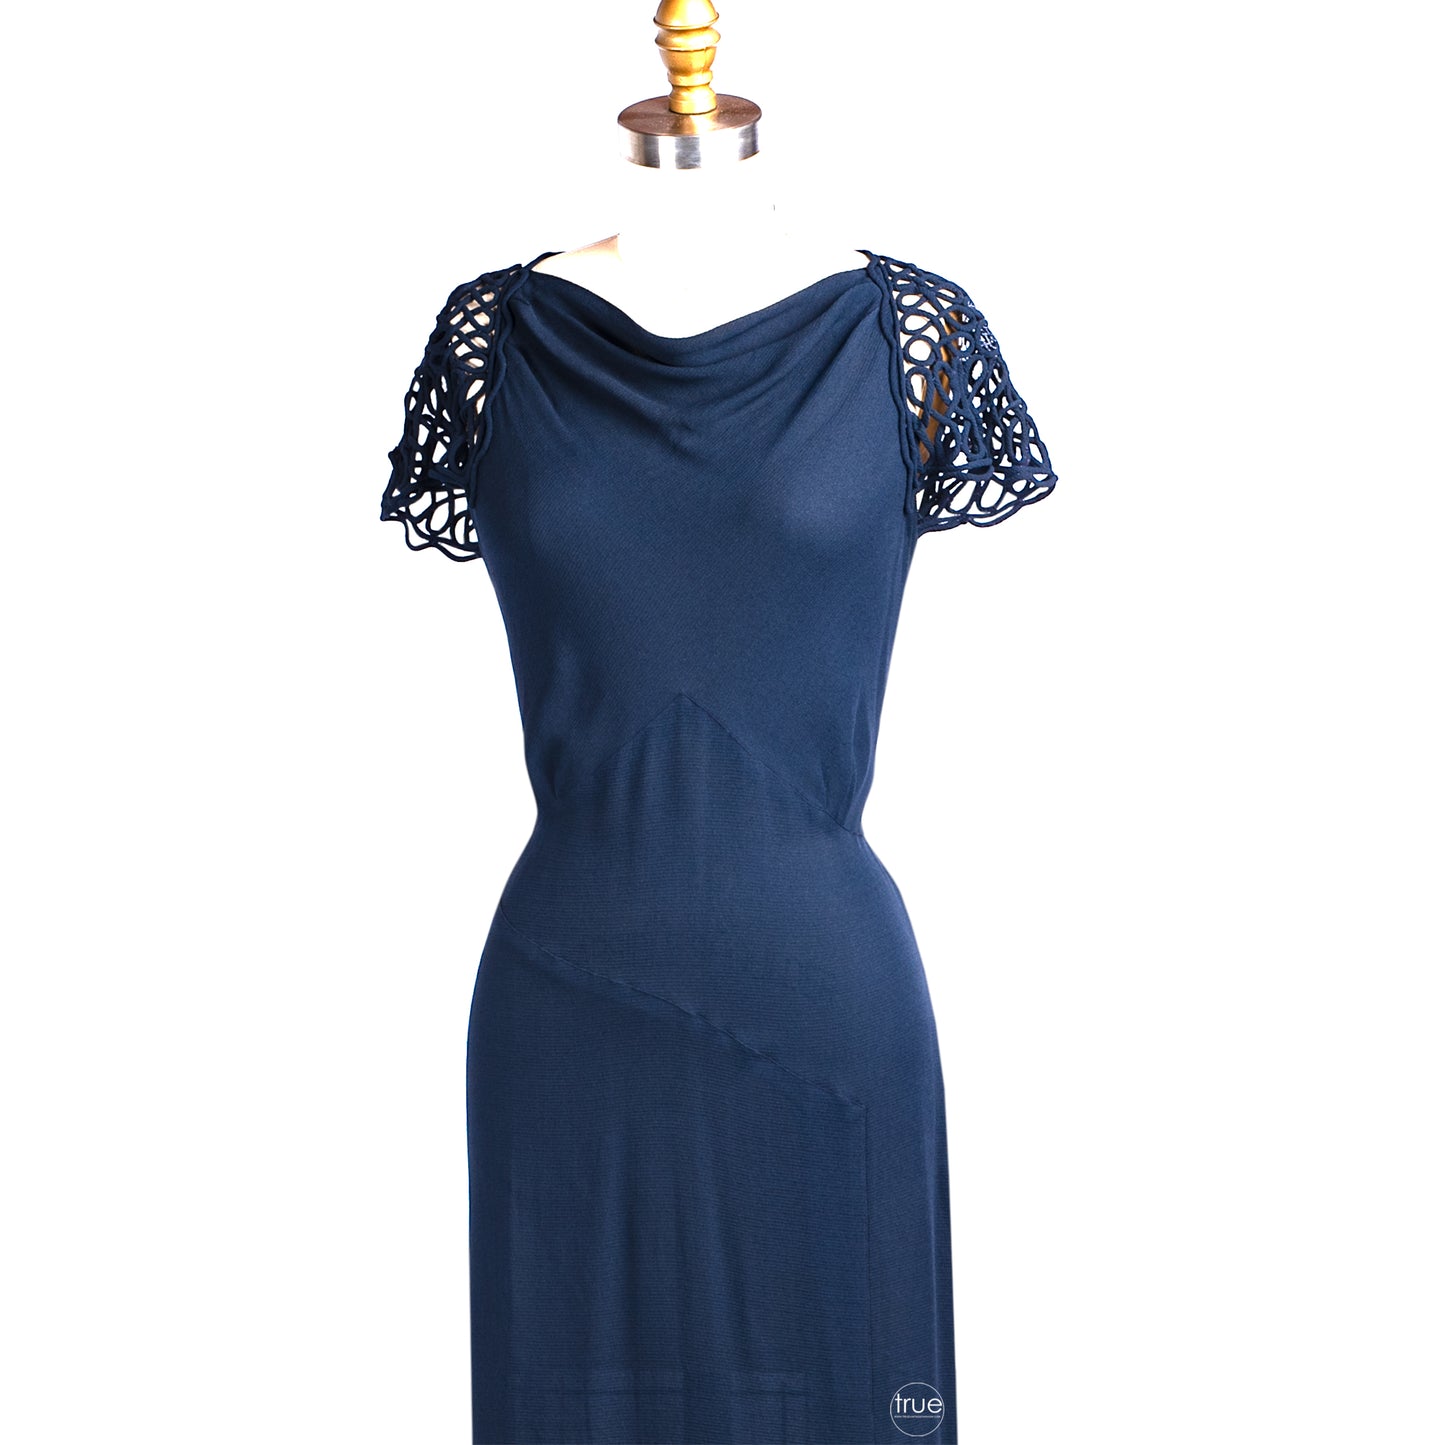 vintage 1930's dress ...navy crepe with corded cage back yoke and flutter sleeves